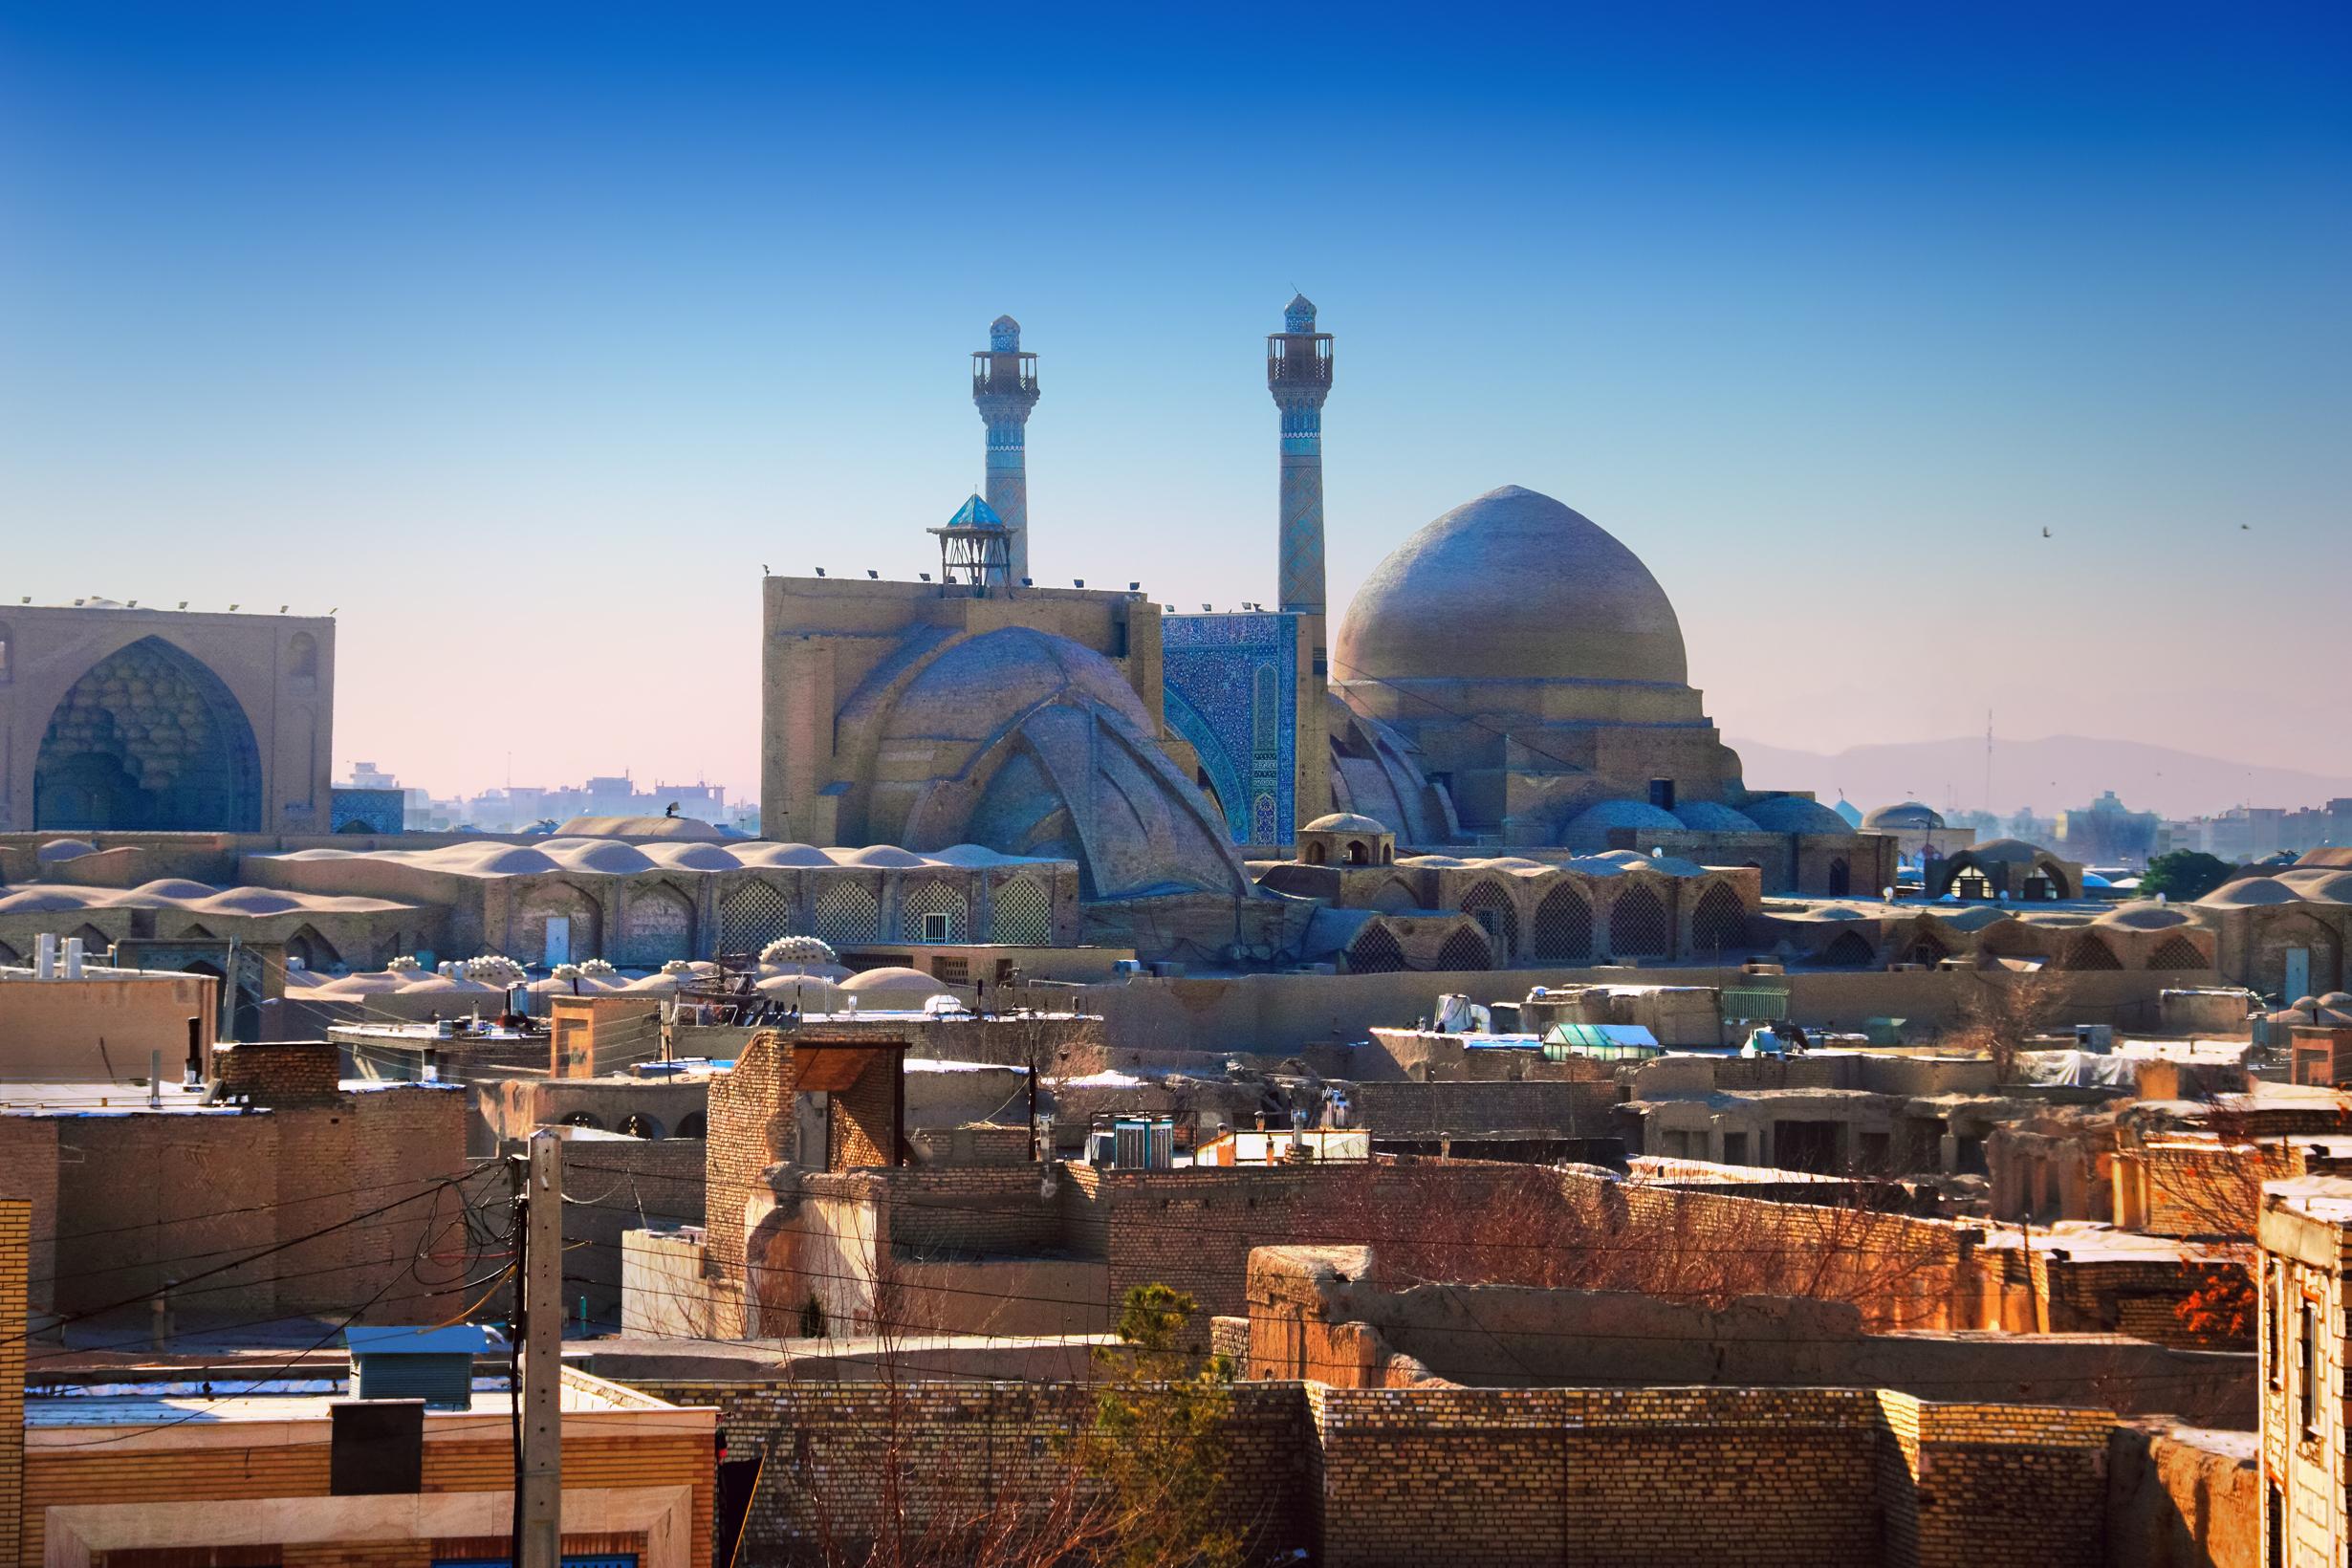 The dome can be seen from rooftops all around Isfahan.